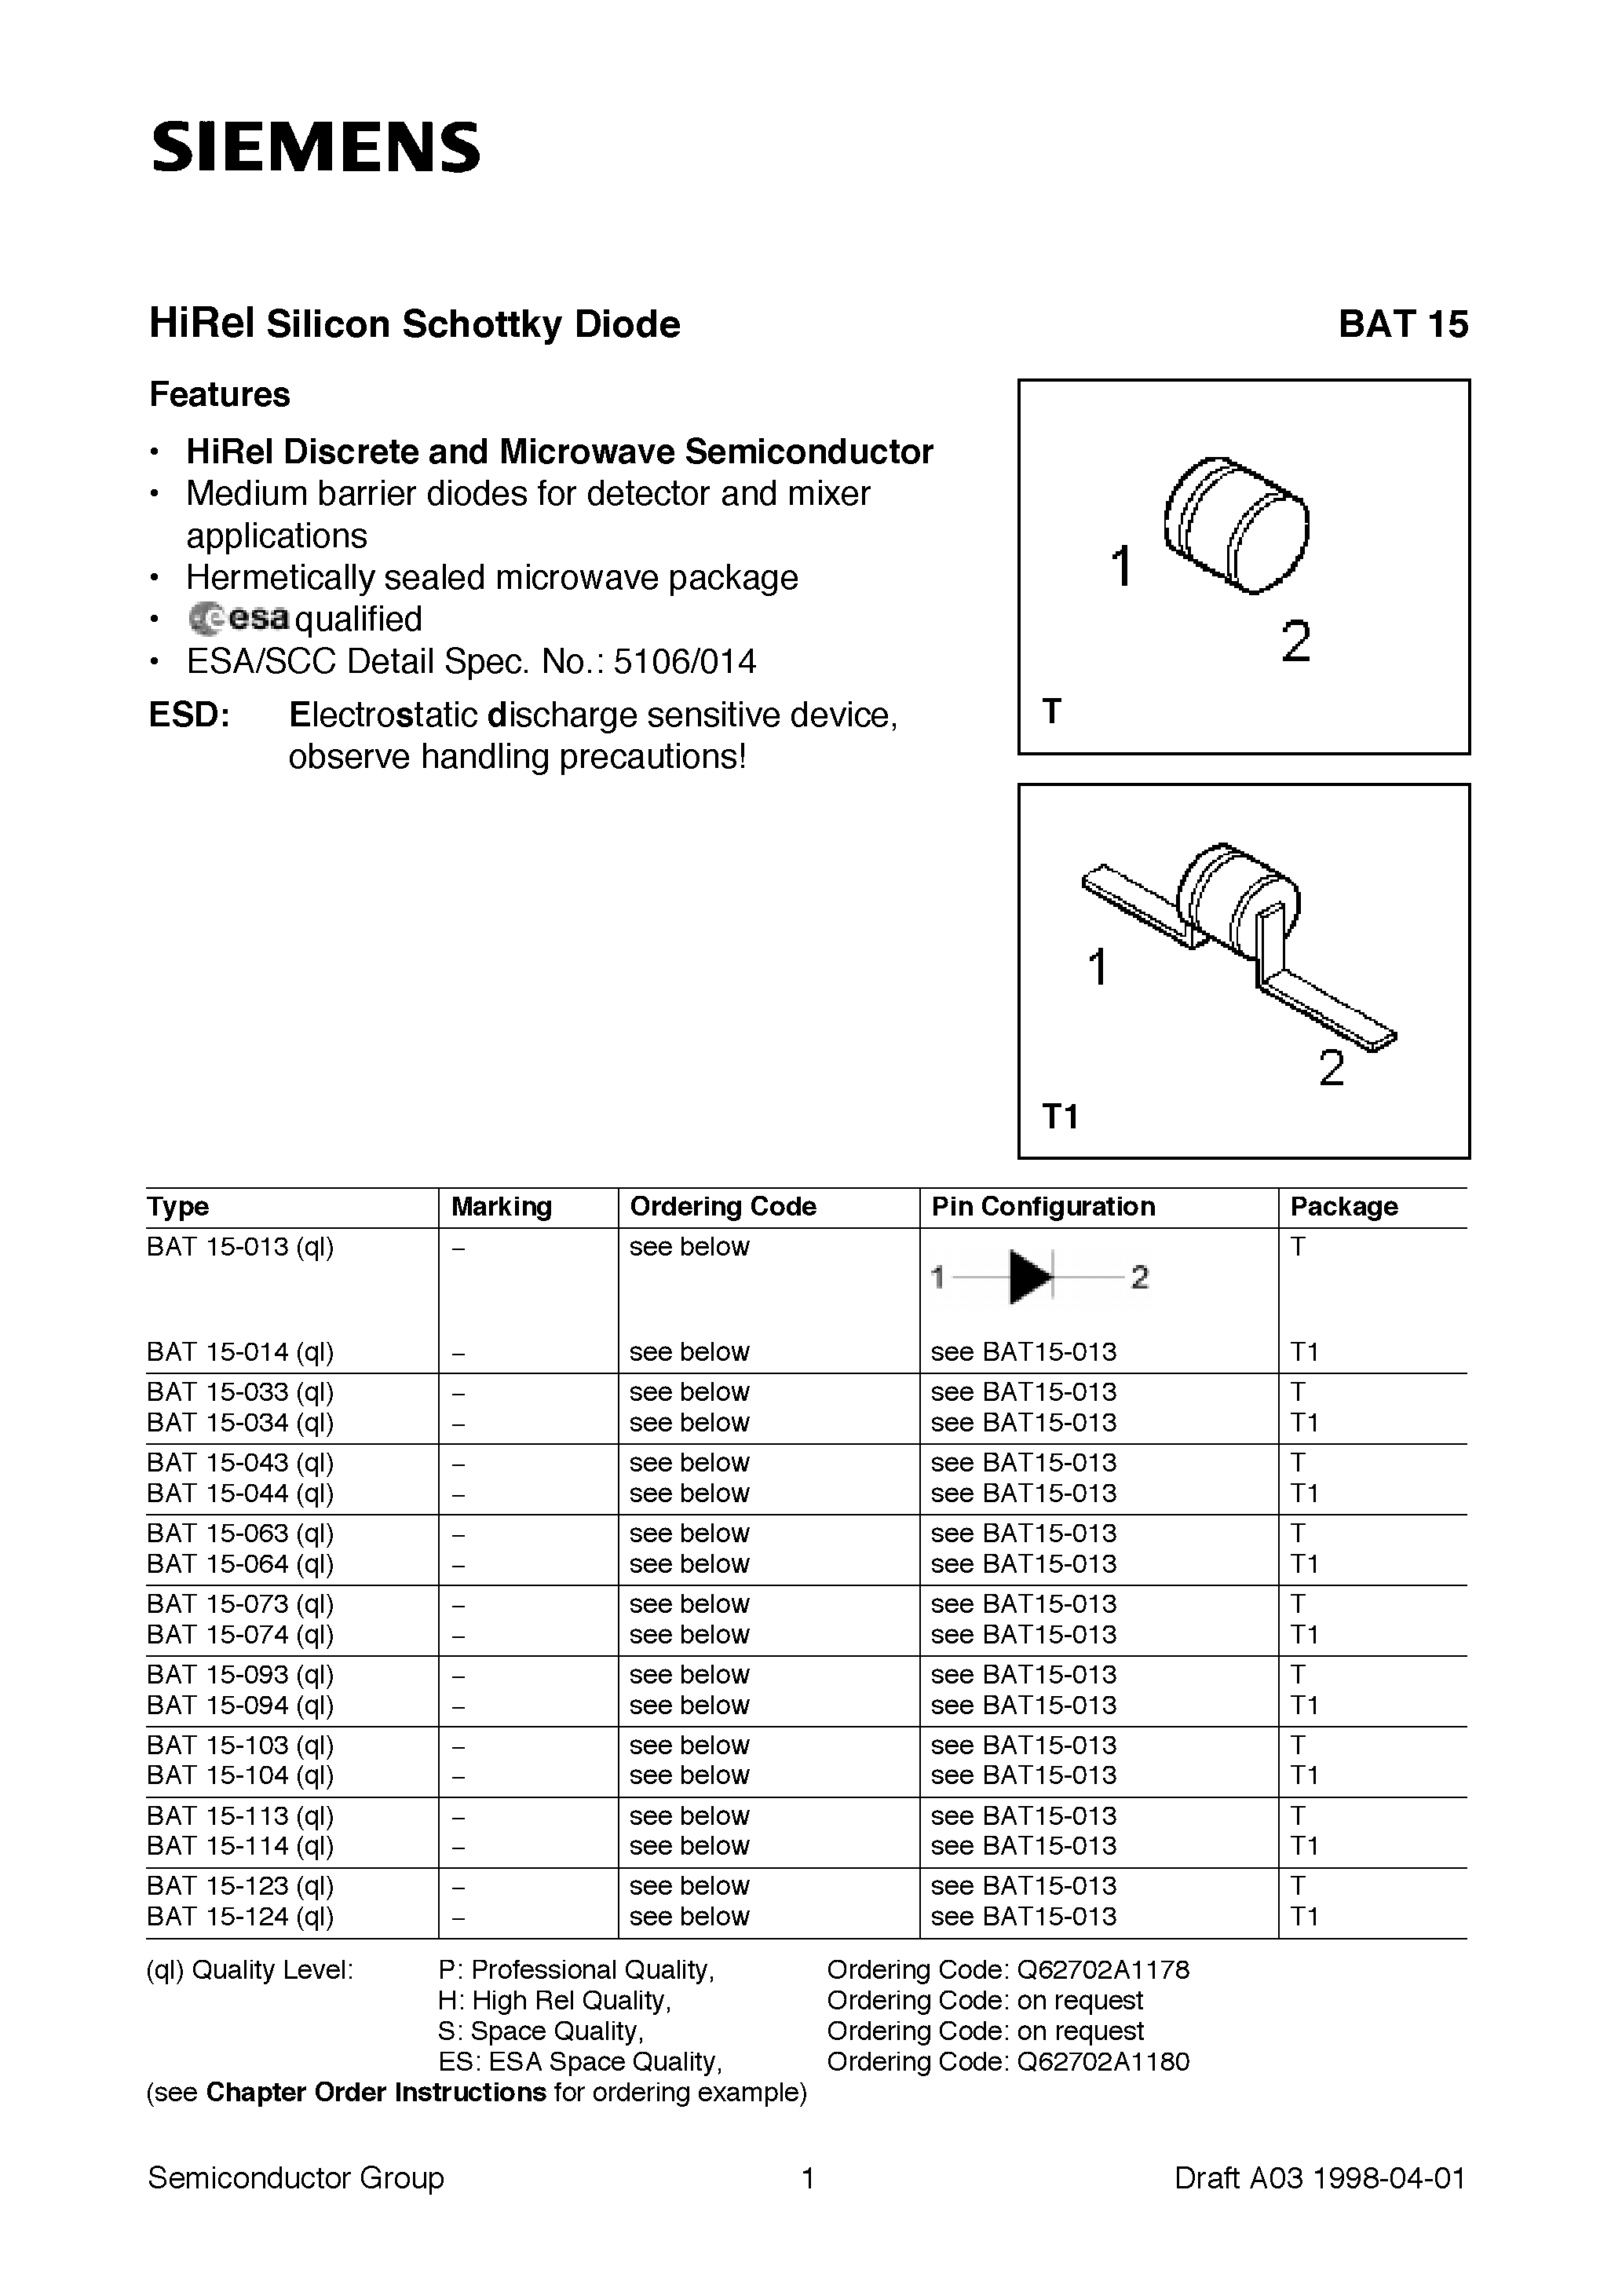 Datasheet BAT15-033 - HiRel Silicon Schottky Diode (HiRel Discrete and Microwave Semiconductor Medium barrier diodes for detector and mixer applications) page 1